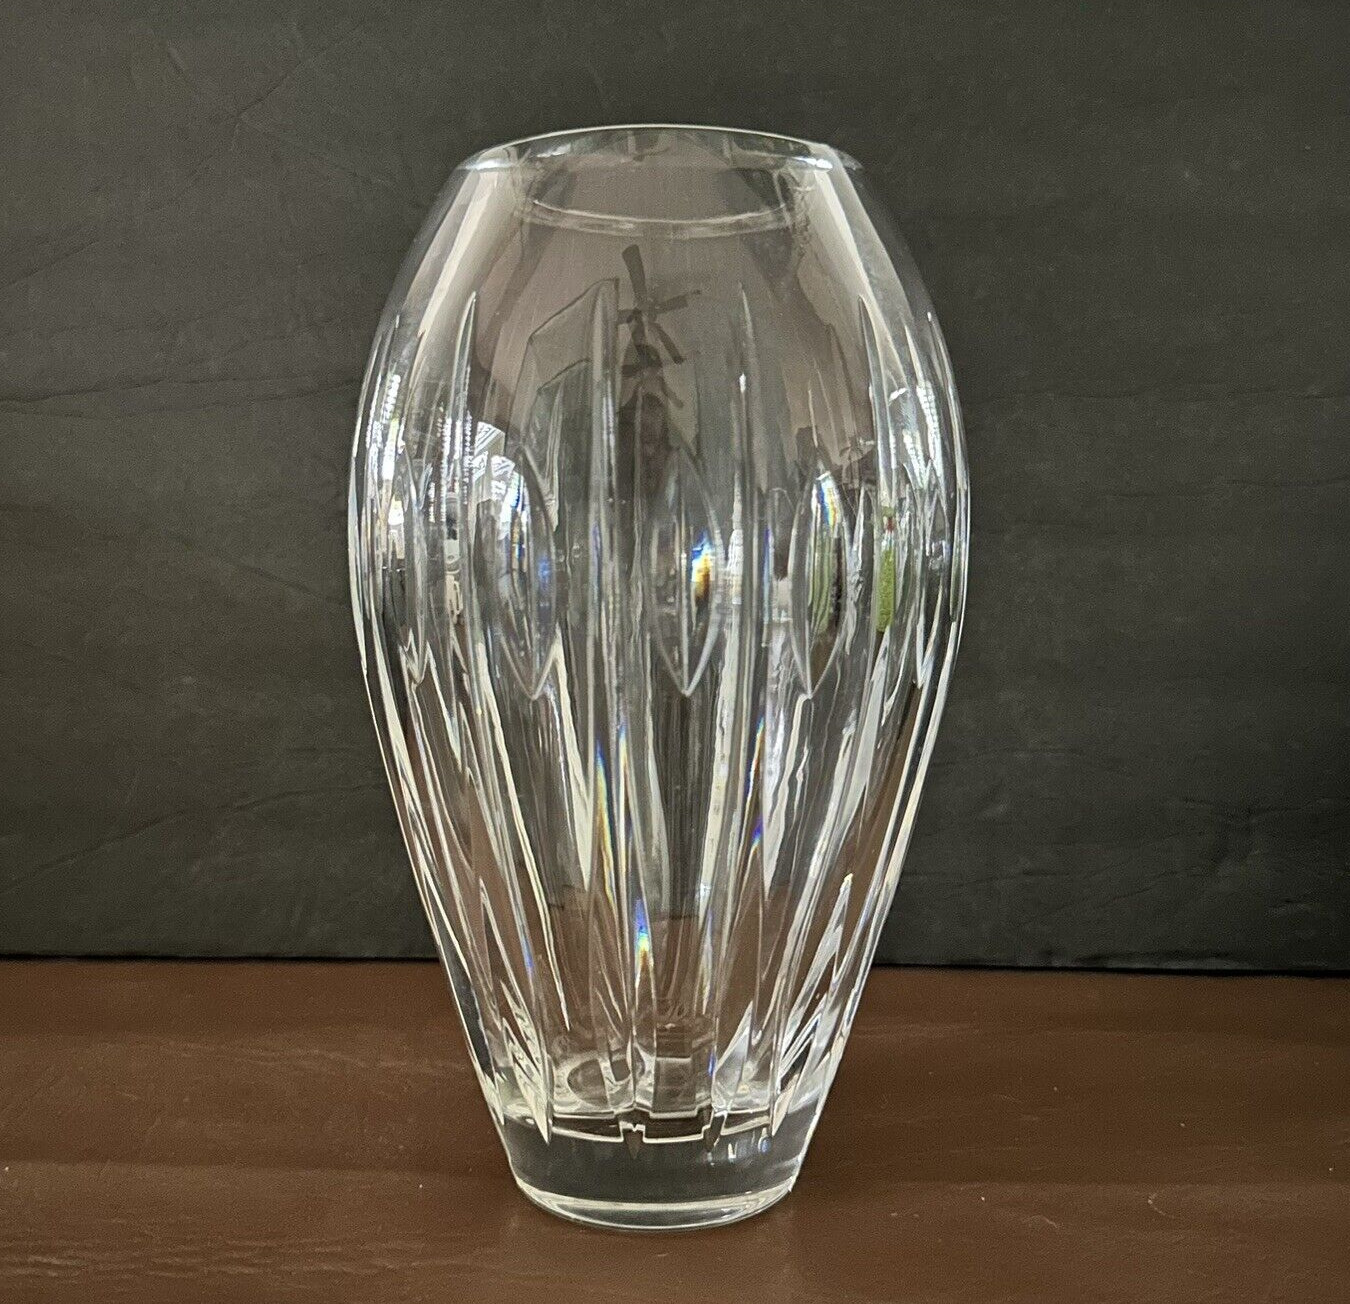 Waterford Marquis ARIEL Crystal Vase #115164 Etched Signature 8” 1997